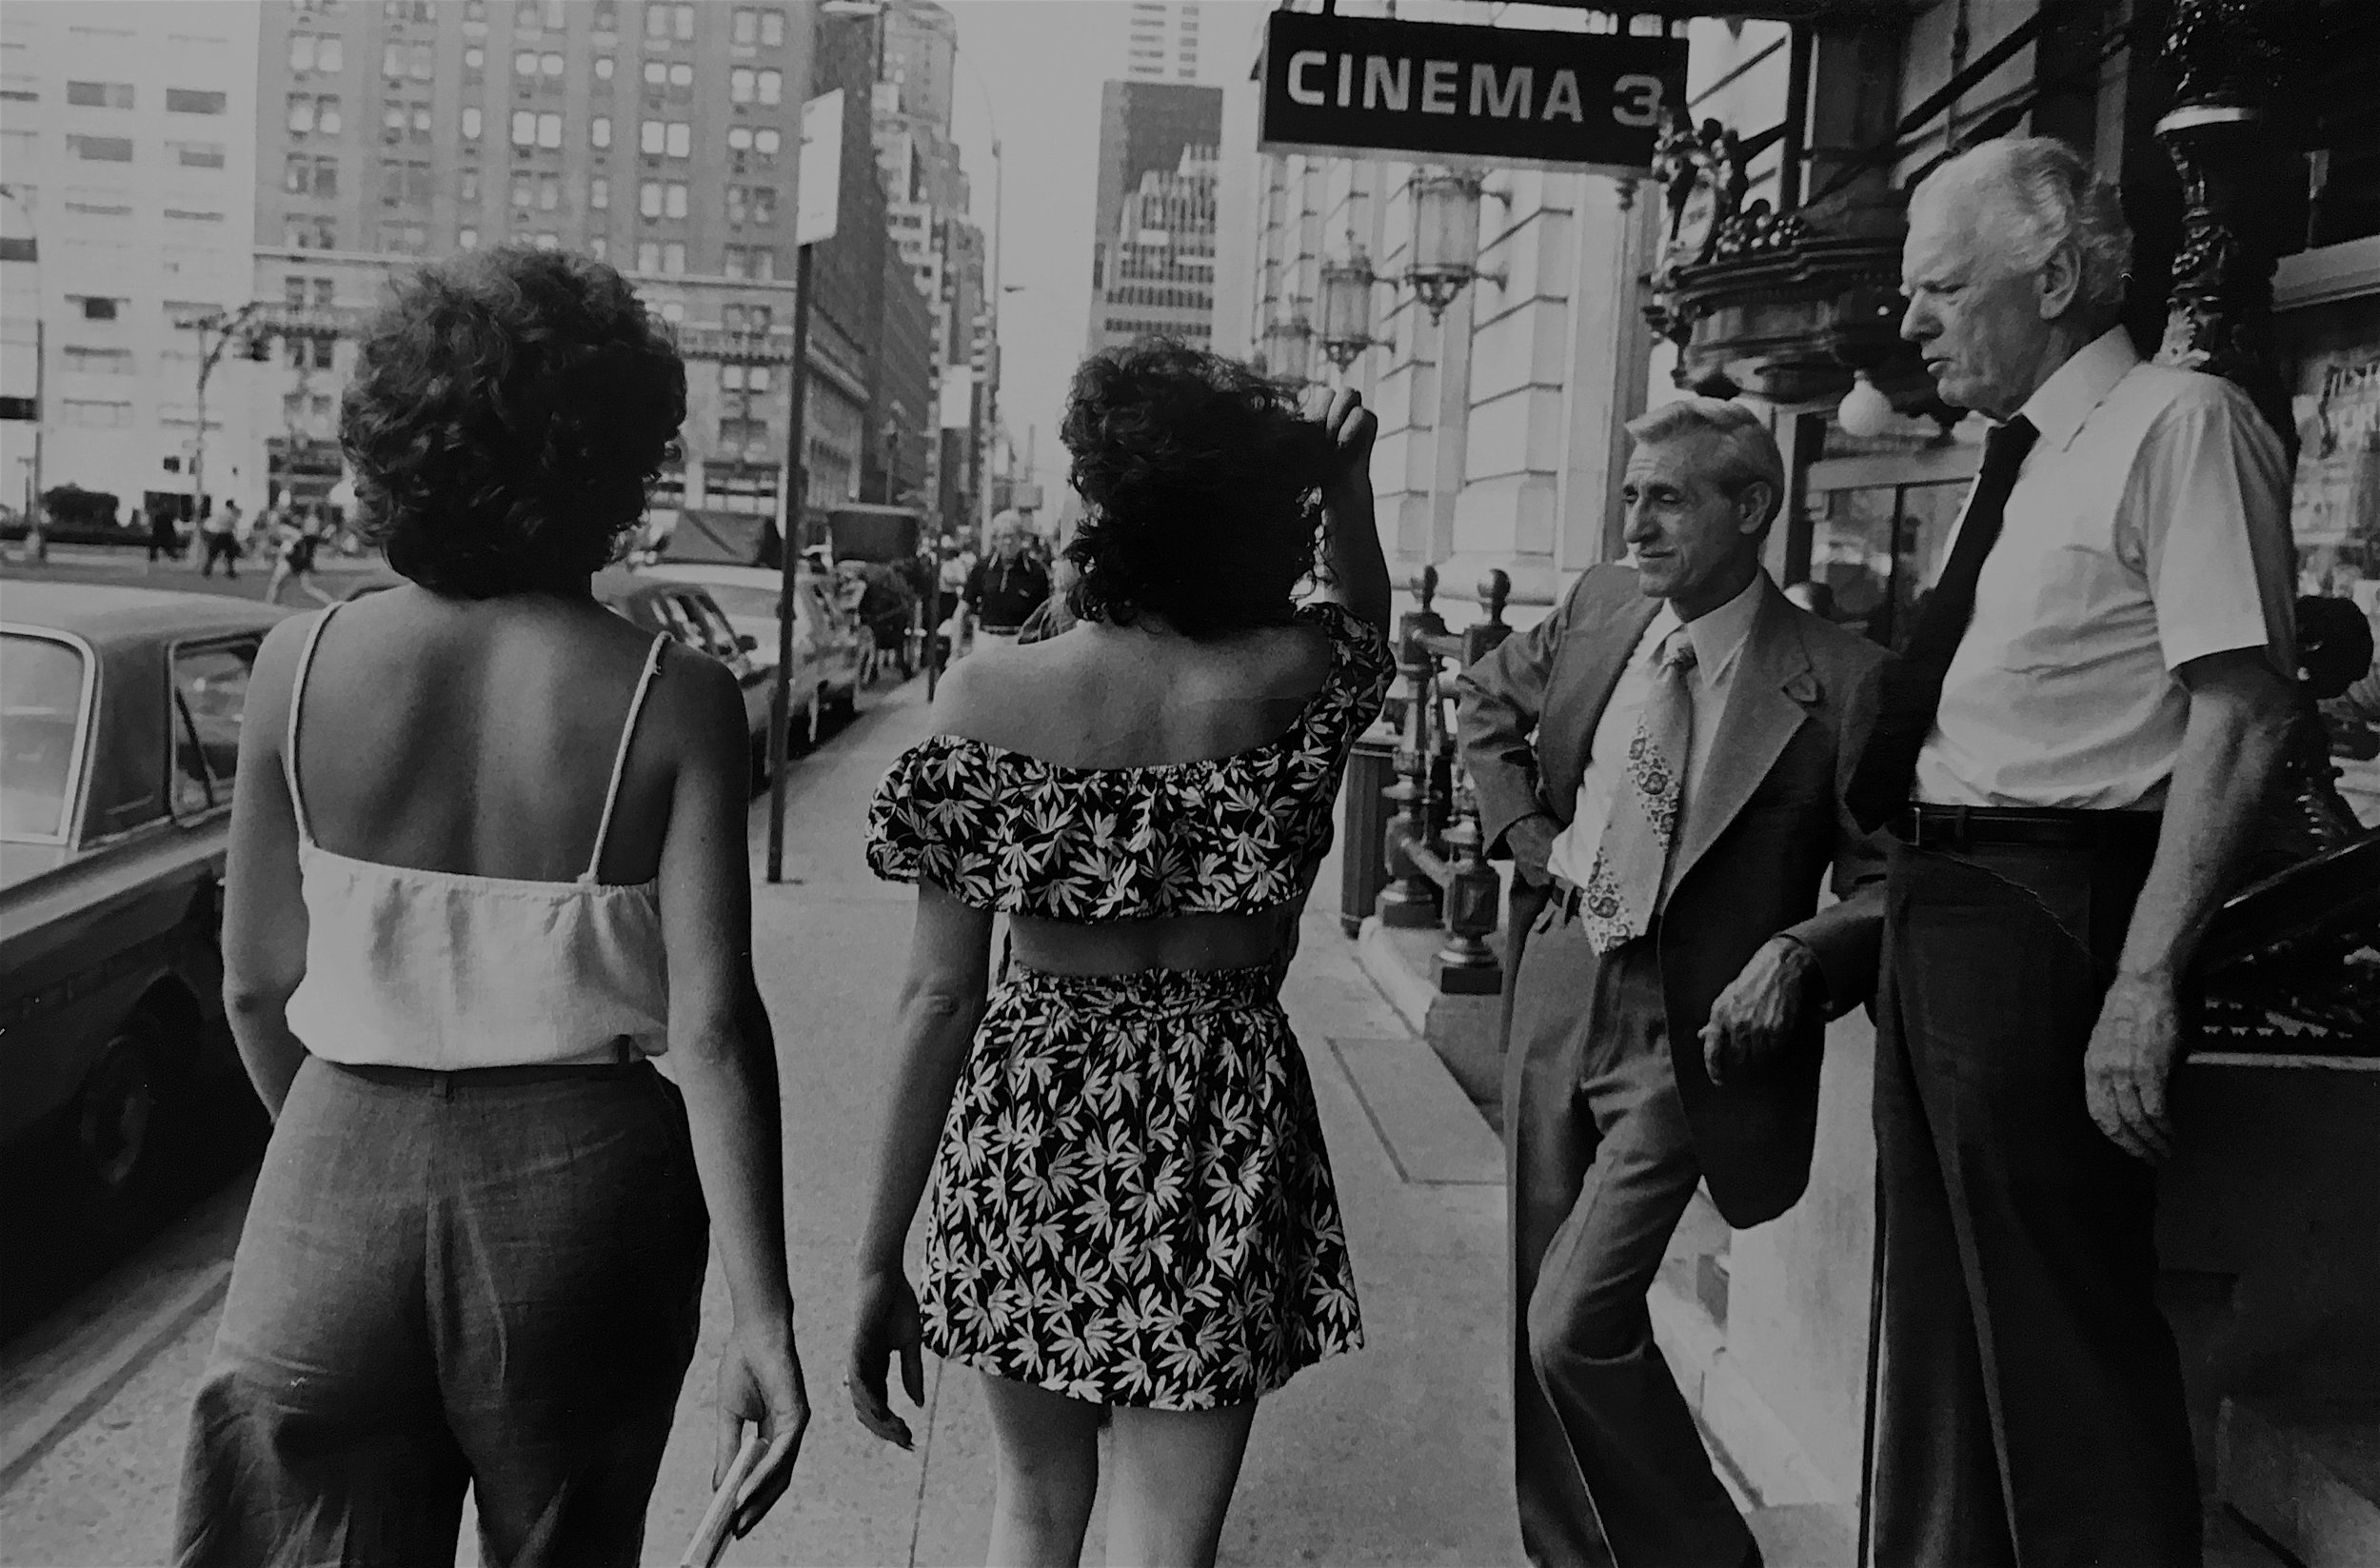 letcherous men ogle young women, 59th st., nyc, mid 1980’s